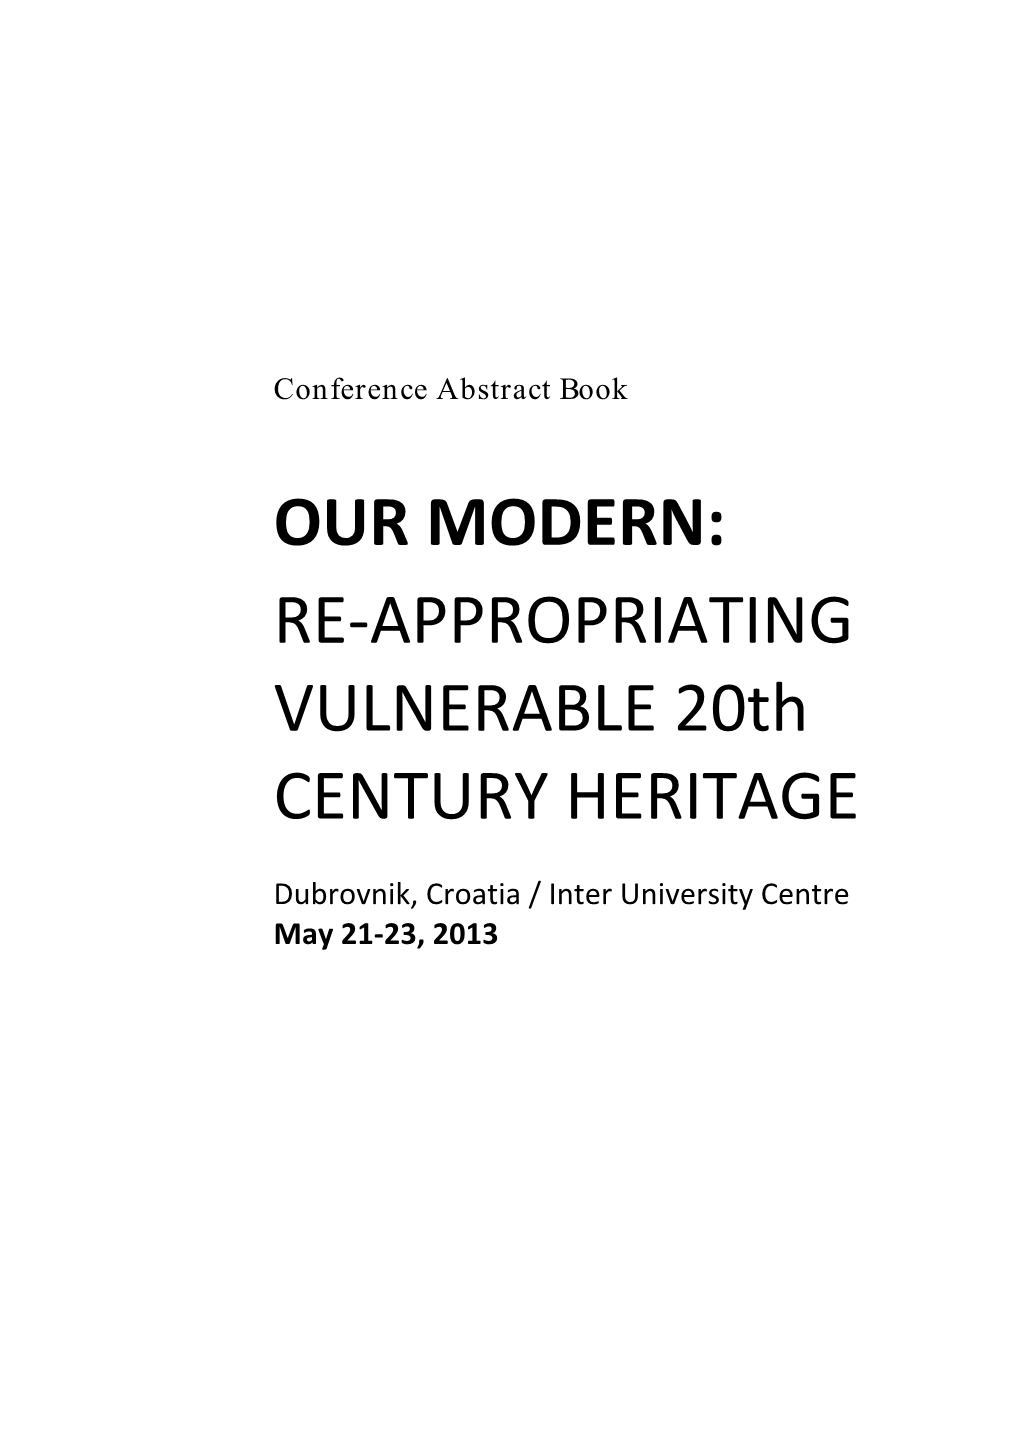 OUR MODERN: RE-APPROPRIATING VULNERABLE 20Th CENTURY HERITAGE